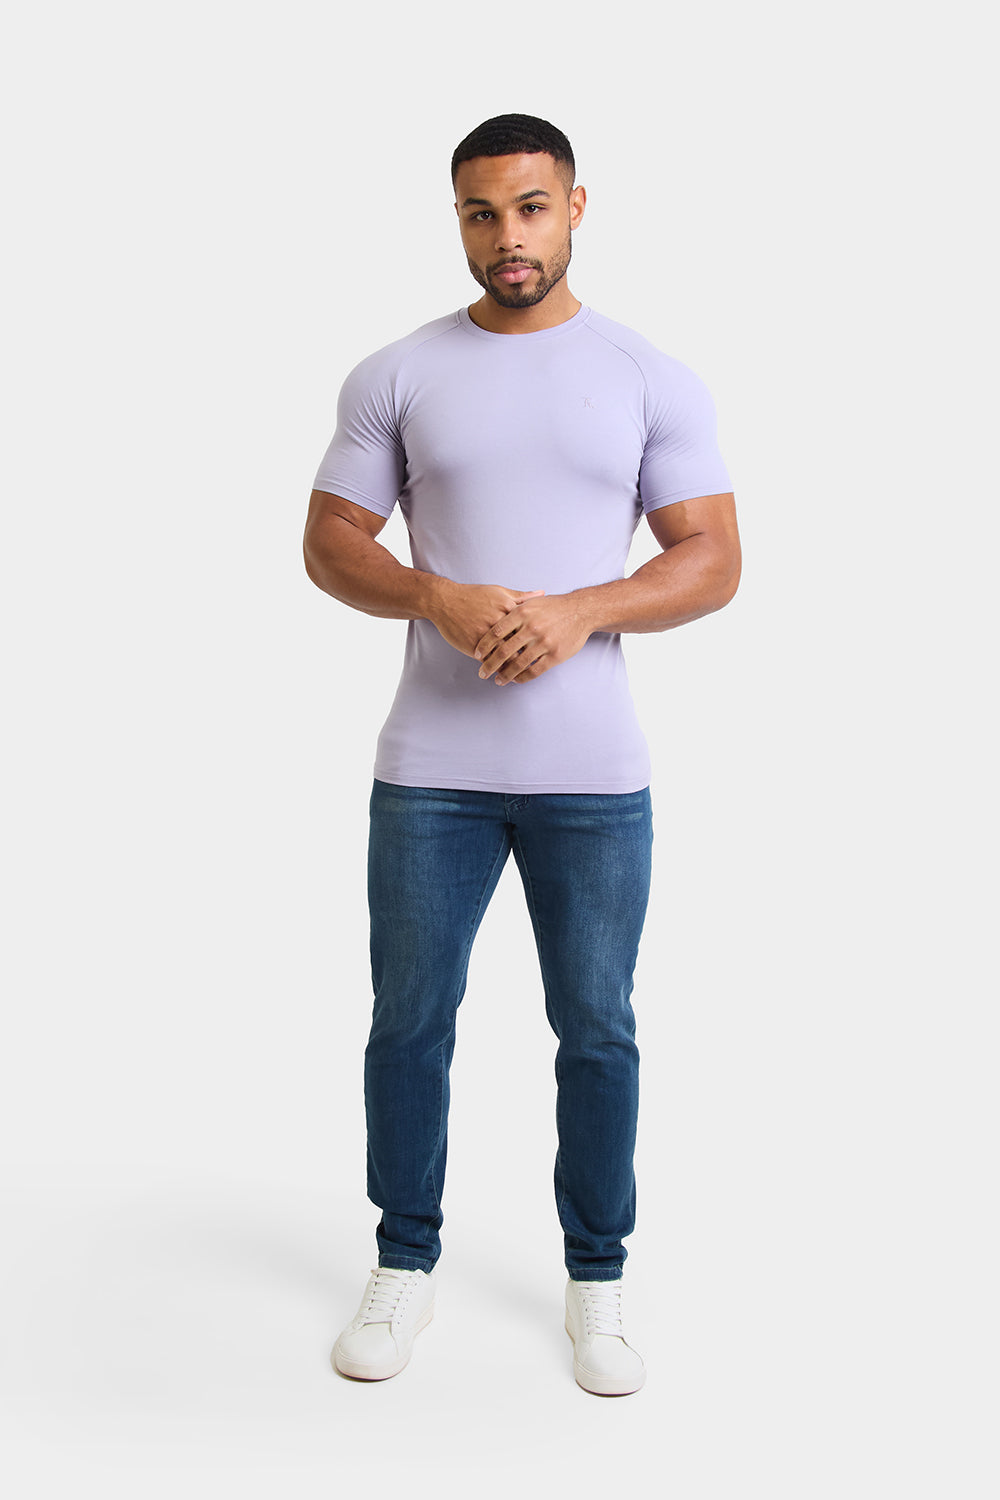 Premium Muscle Fit T-Shirt in Dusty Lilac - TAILORED ATHLETE - ROW